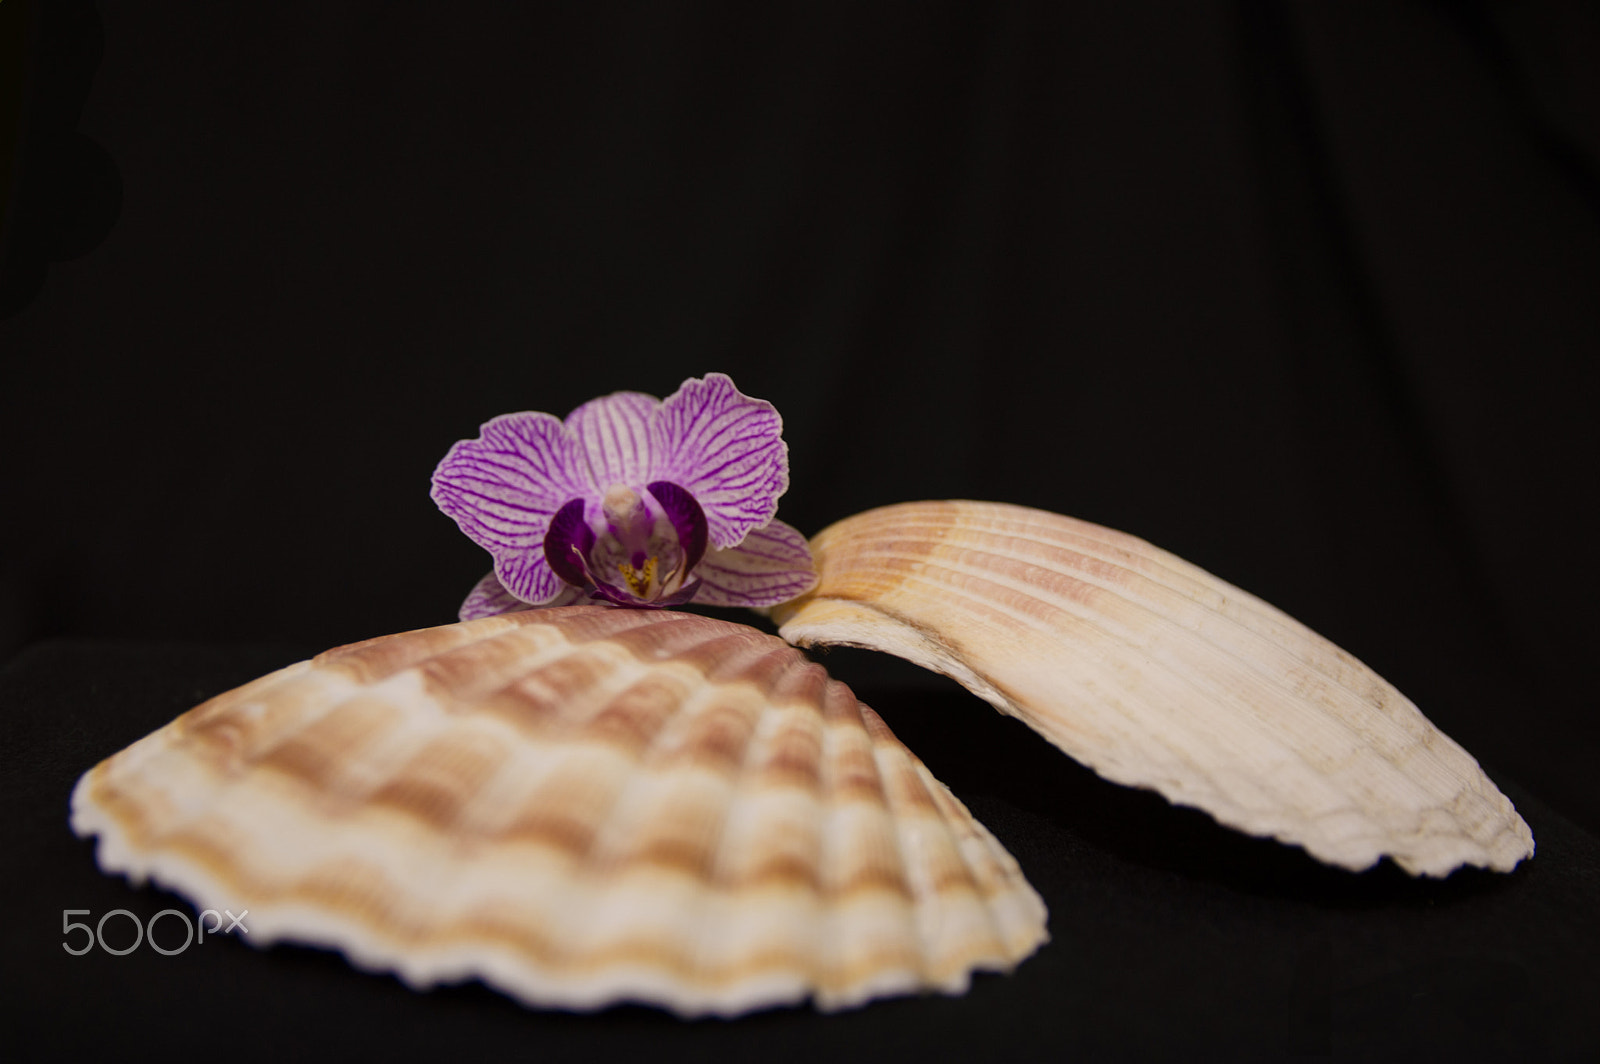 Nikon D3200 + Sigma 17-70mm F2.8-4 DC Macro OS HSM | C sample photo. Clam and orchid flower photography